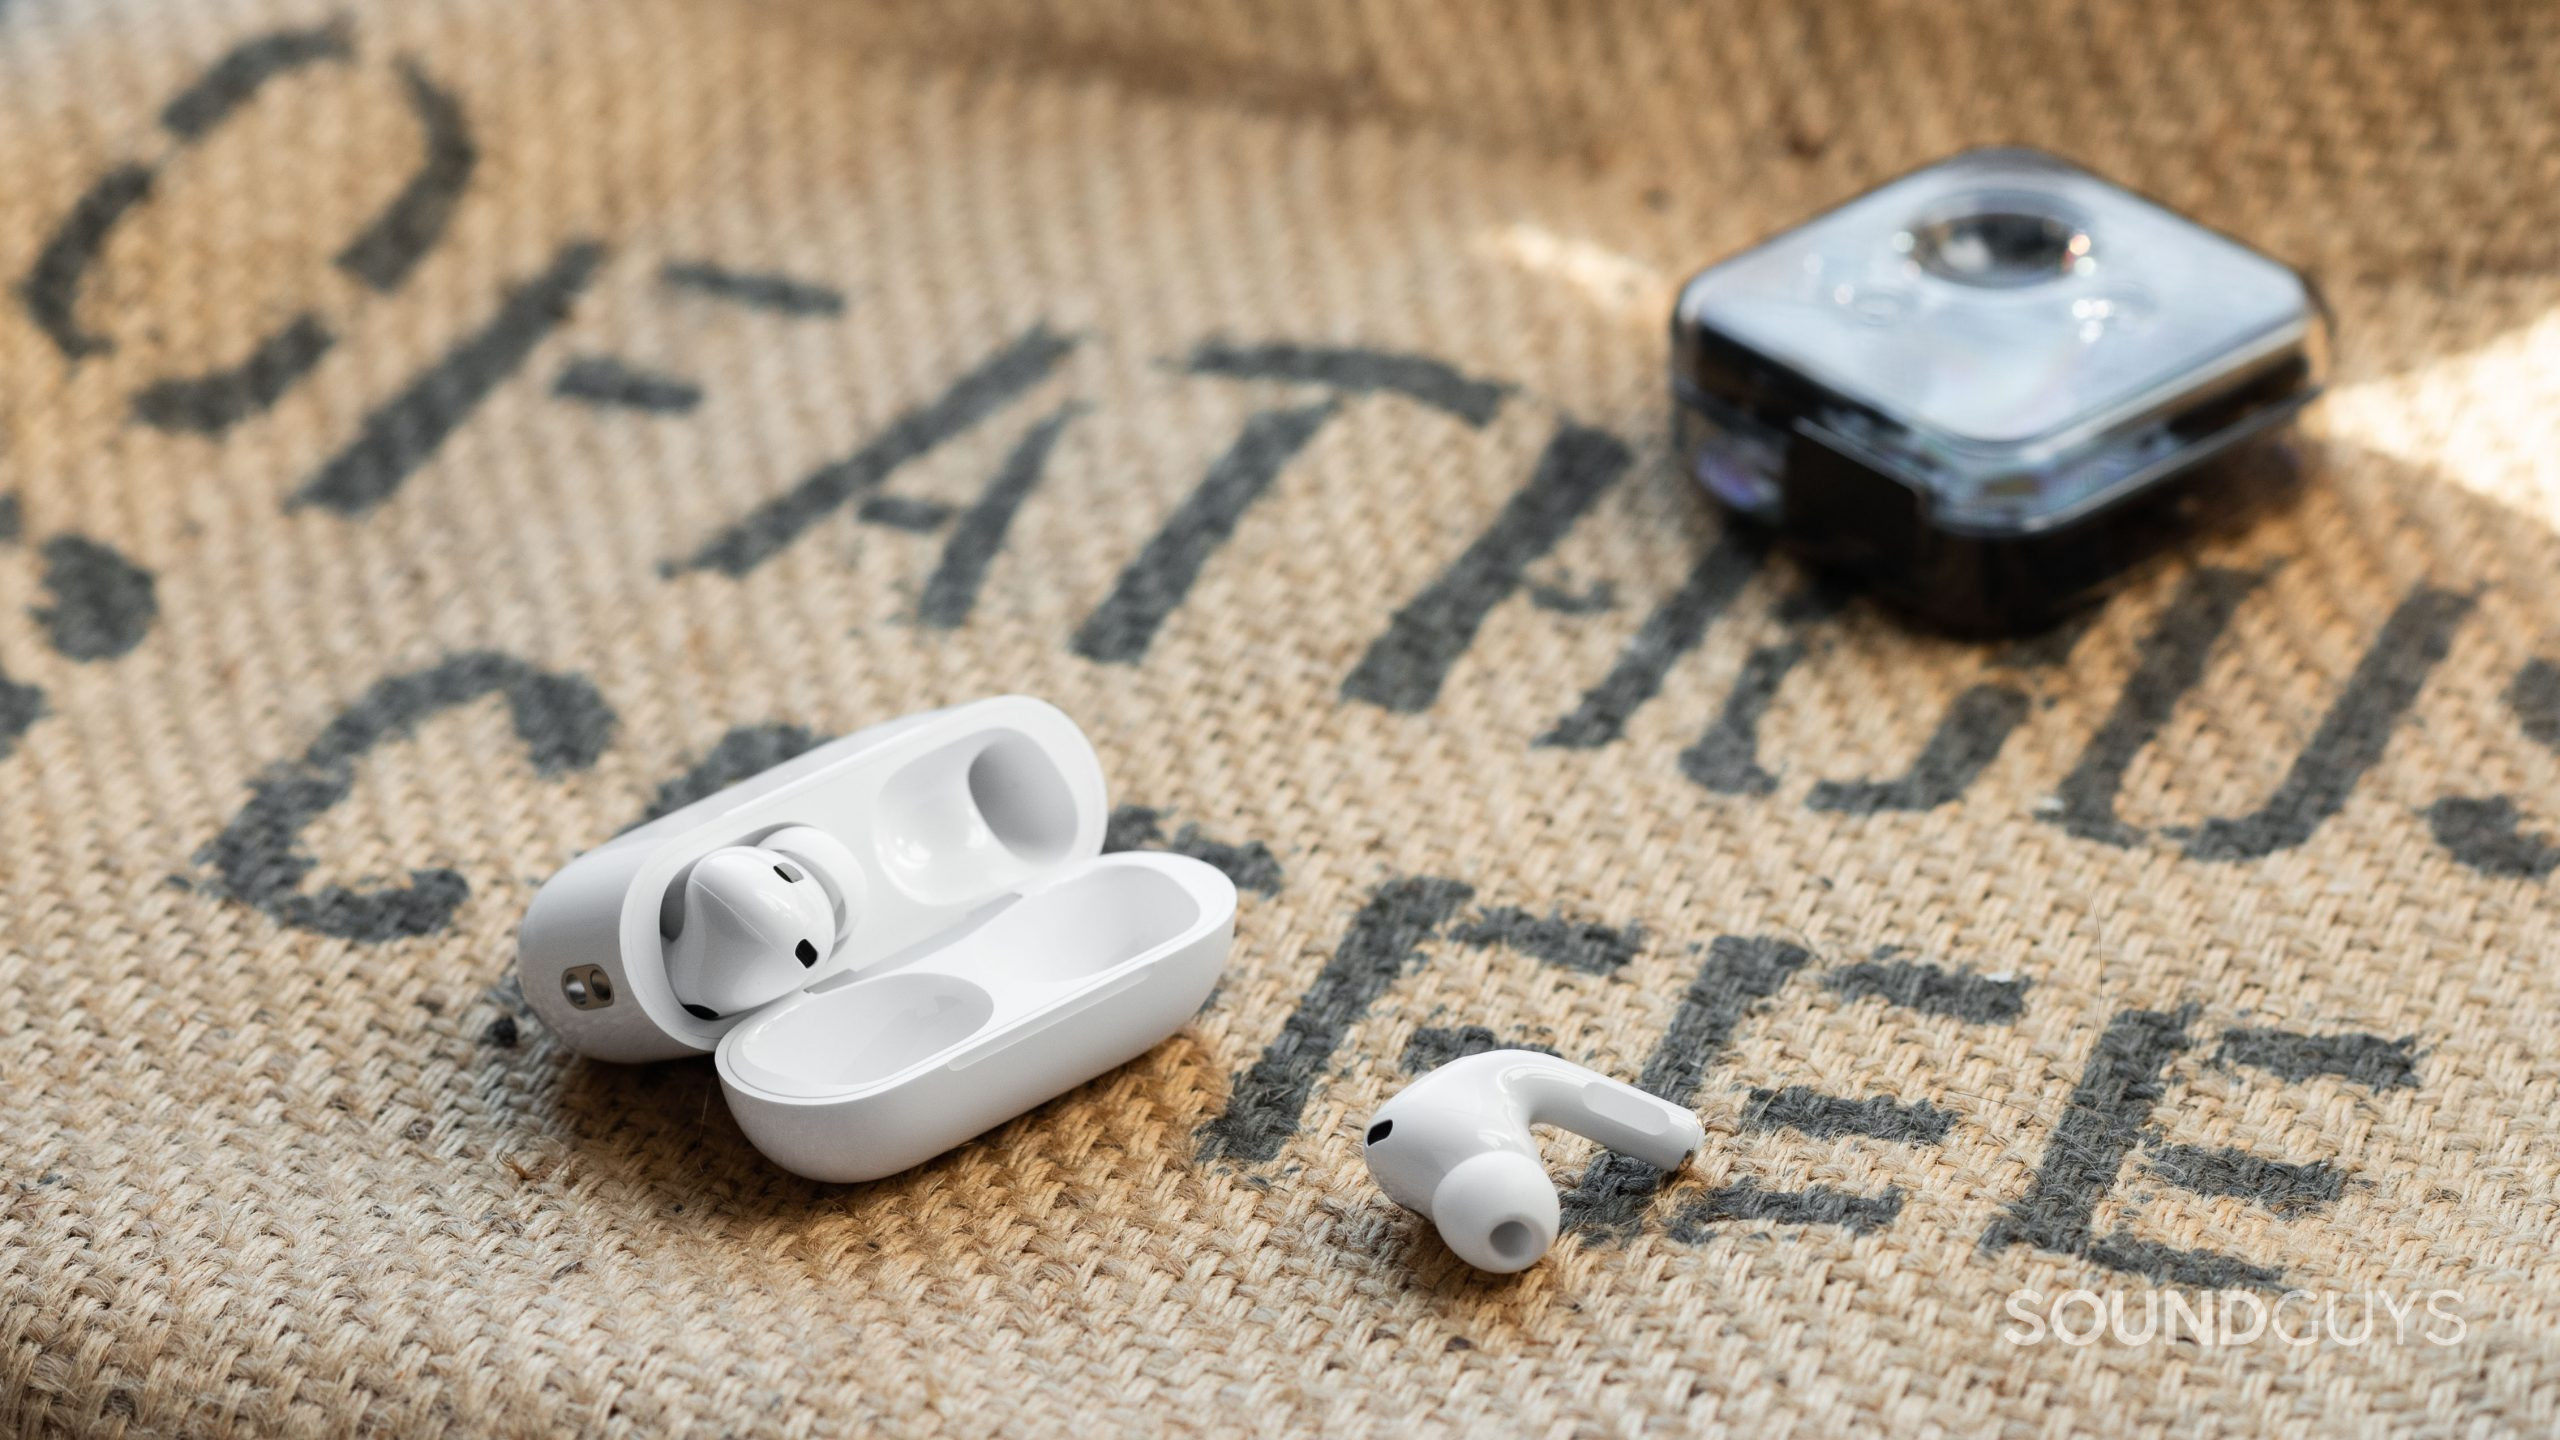 The Apple AirPods Pro (2nd generation) case open with one of the earbuds on a burlap sack, and the Nothing Ear 1 case in the background.